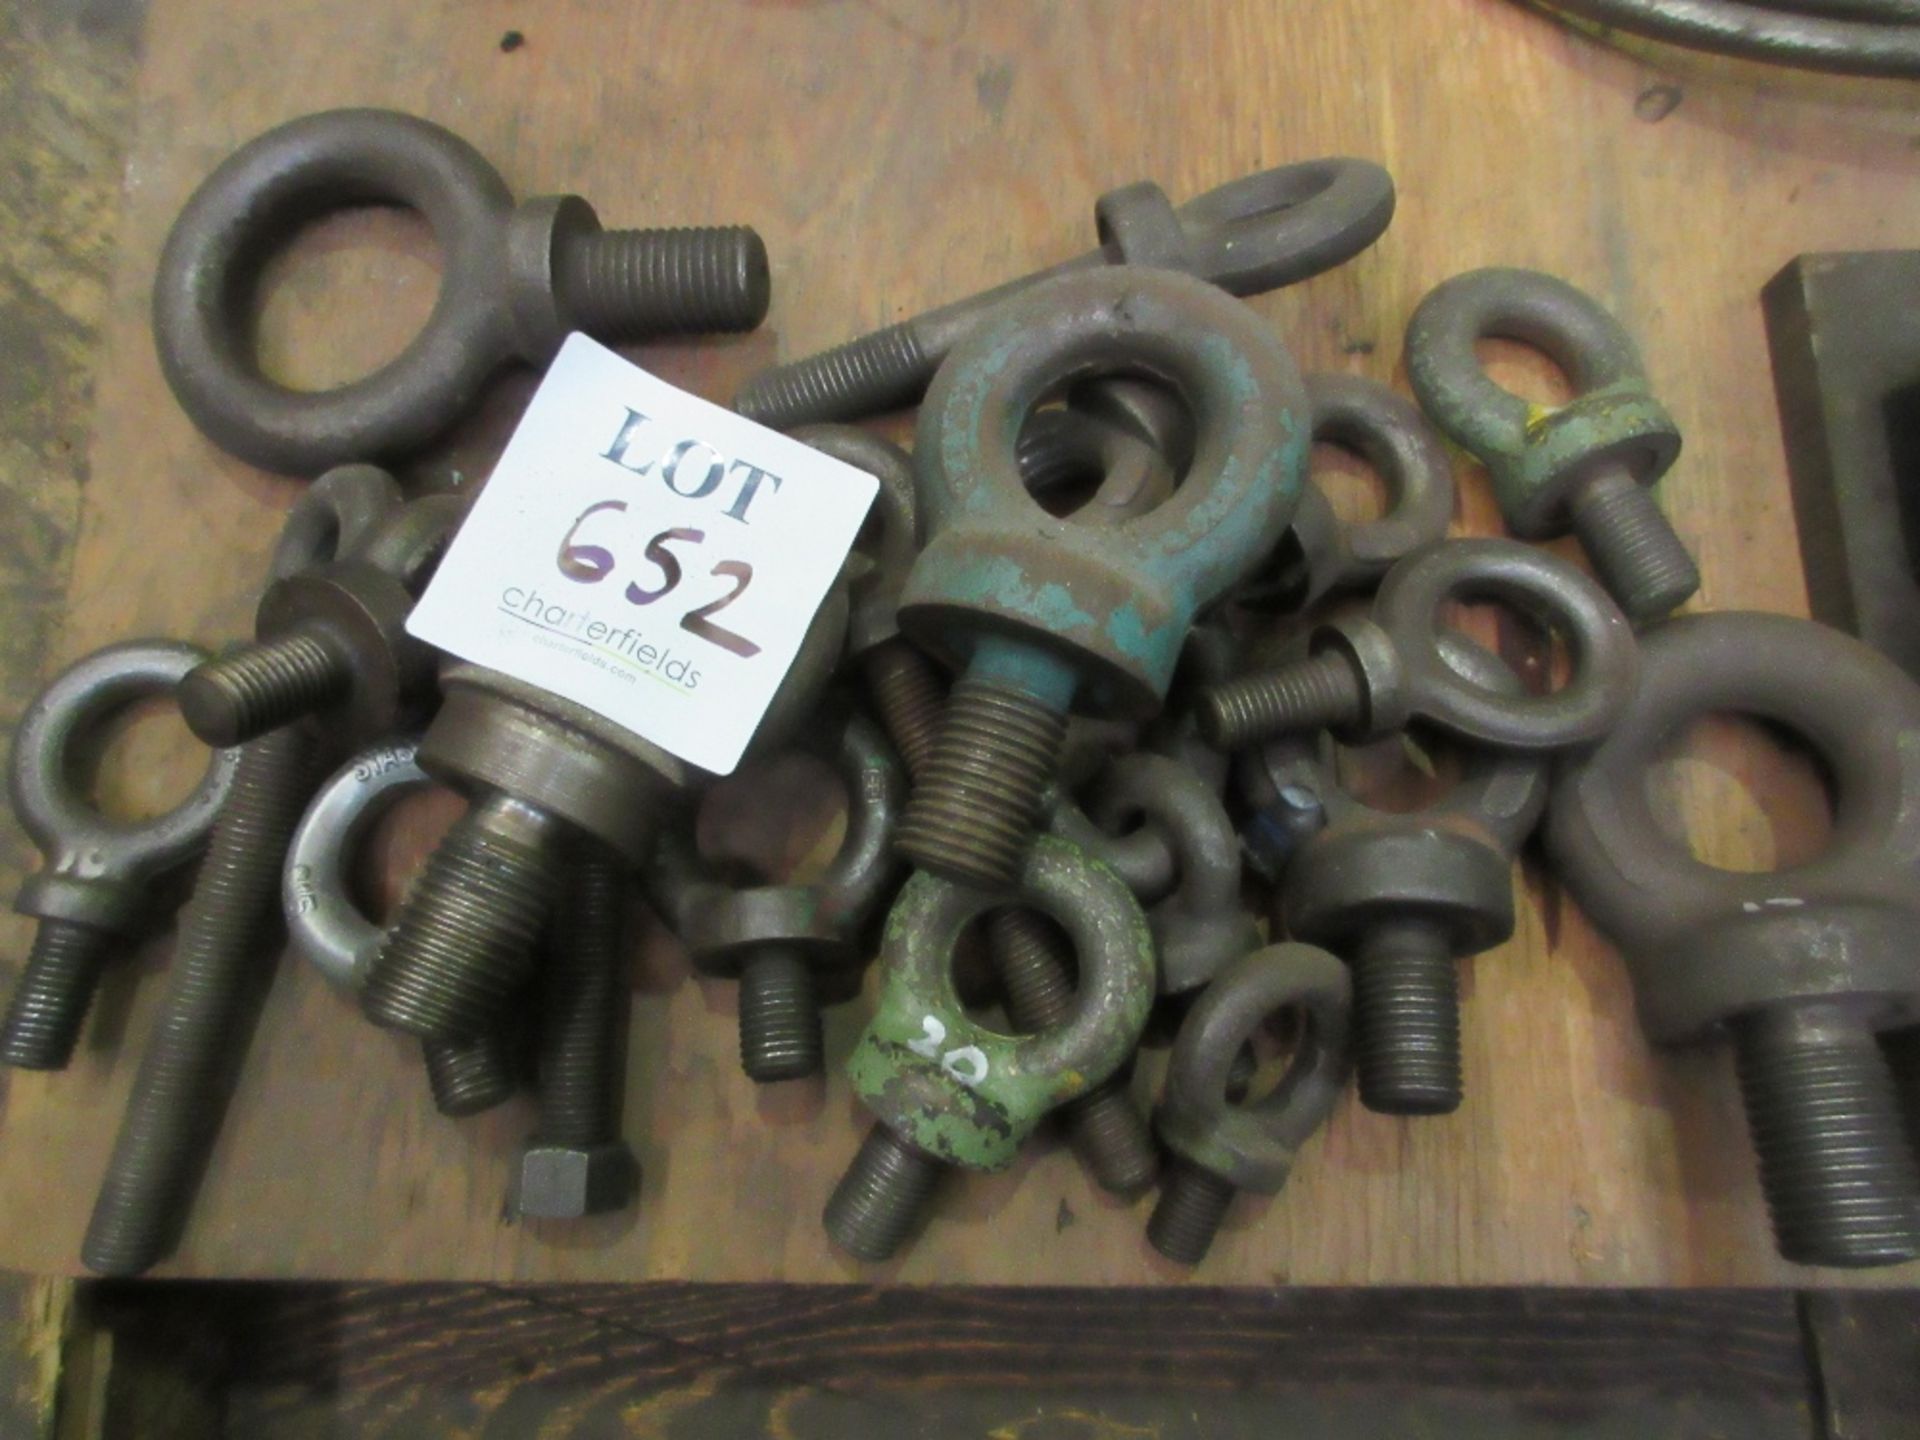 Quantity of various threaded lifting eye bolts